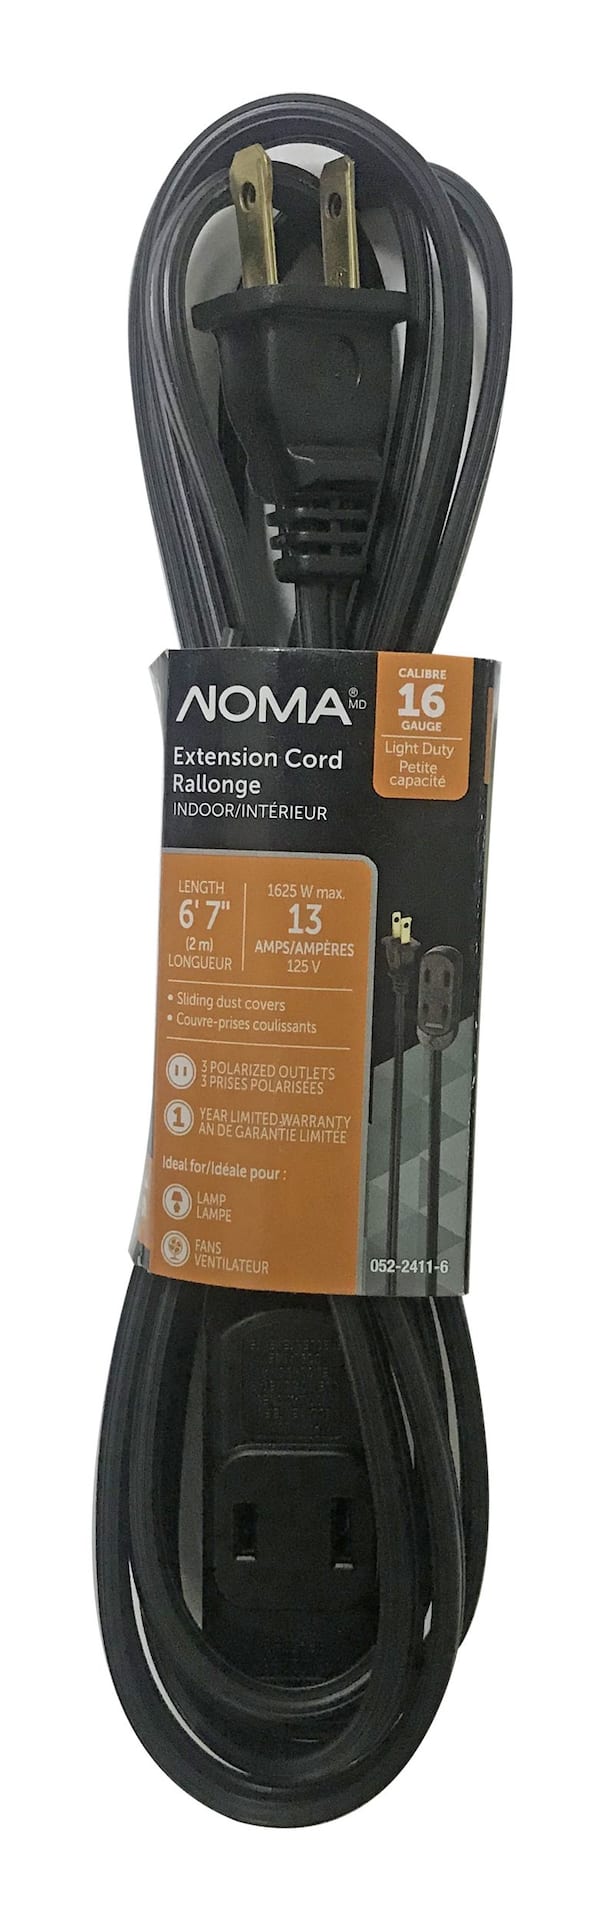 NOMA 6-ft 7-in 16/2 Light Duty Extension Cord with 3 Outlets, Black